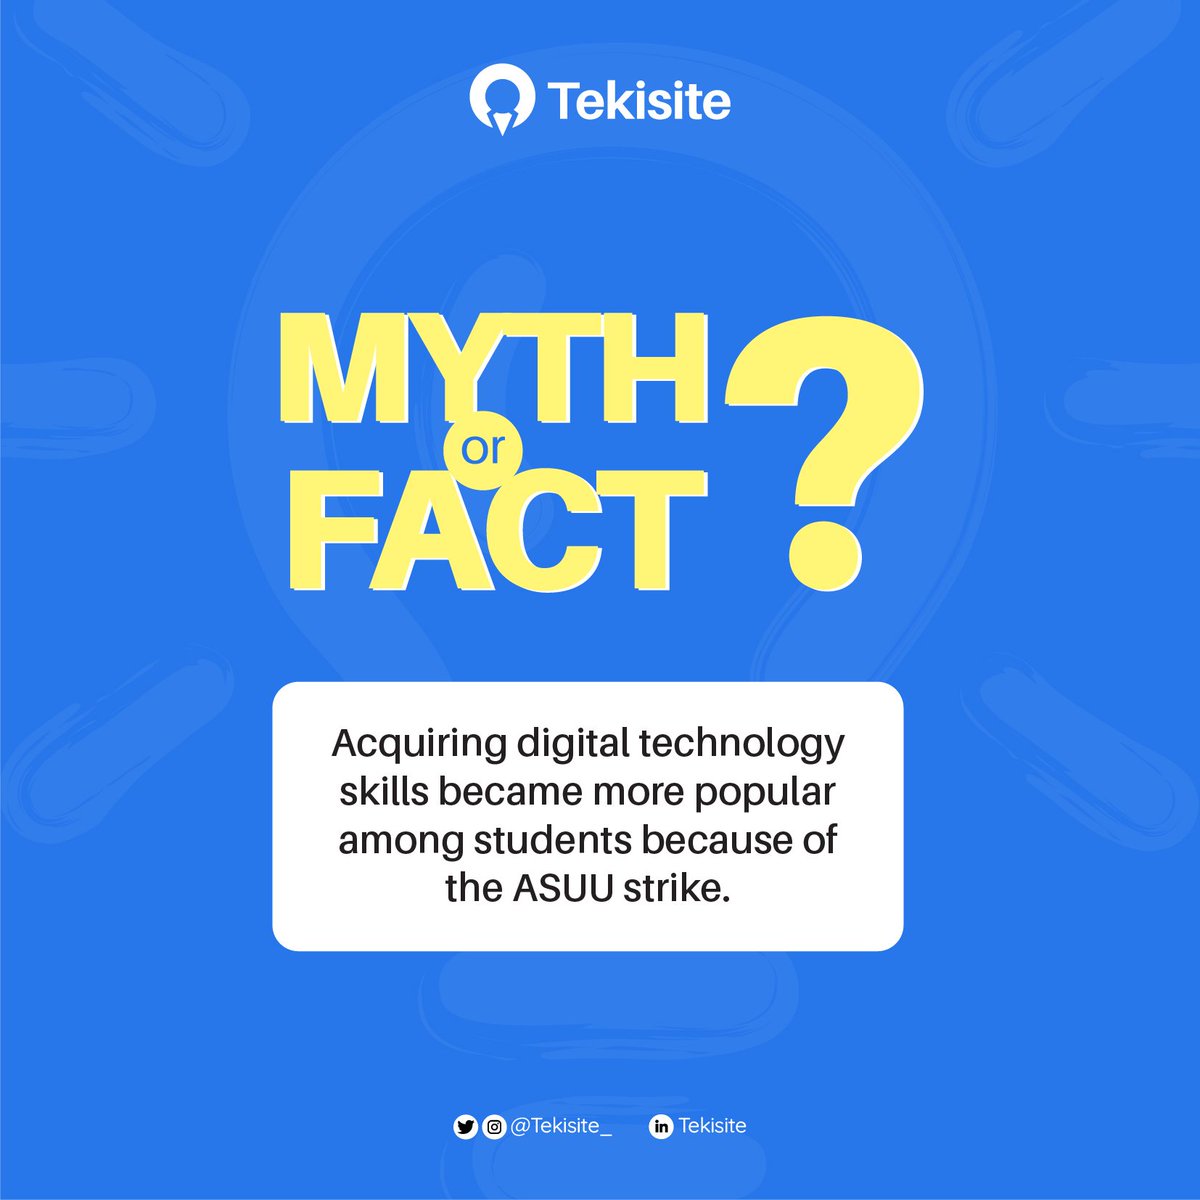 Do you have a thought on this?
Share that story!

#tekisiteinlagos #digitalskils #technology